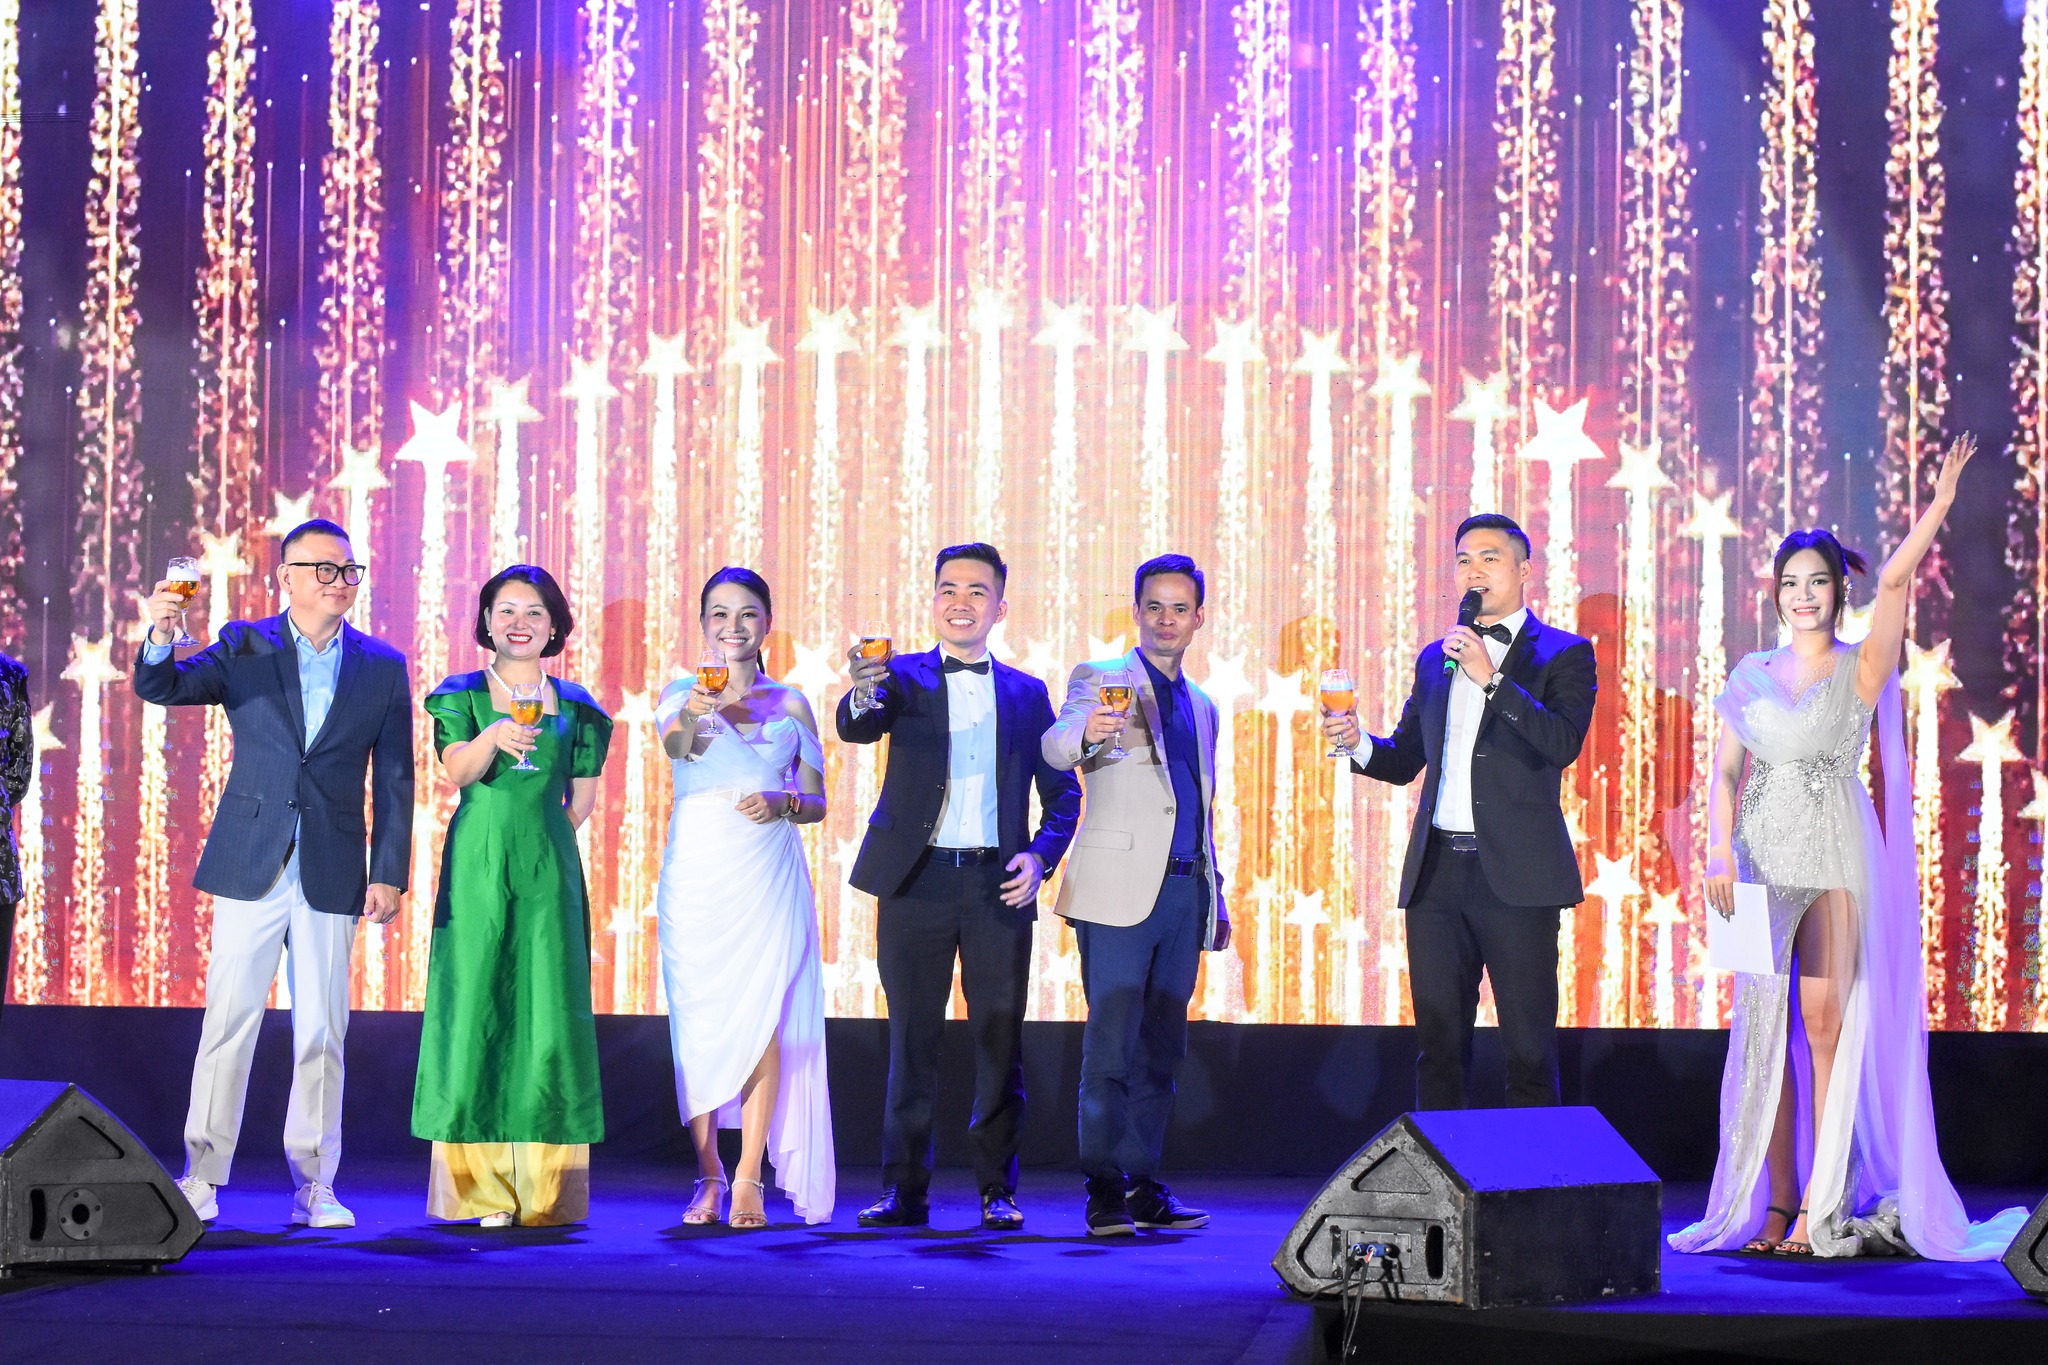 GALA DINNER DAI VIET'S GOT TALENT WITH NEARLY 1000 GUESTS ARIYANA CONVENTION CENTRE DANANG